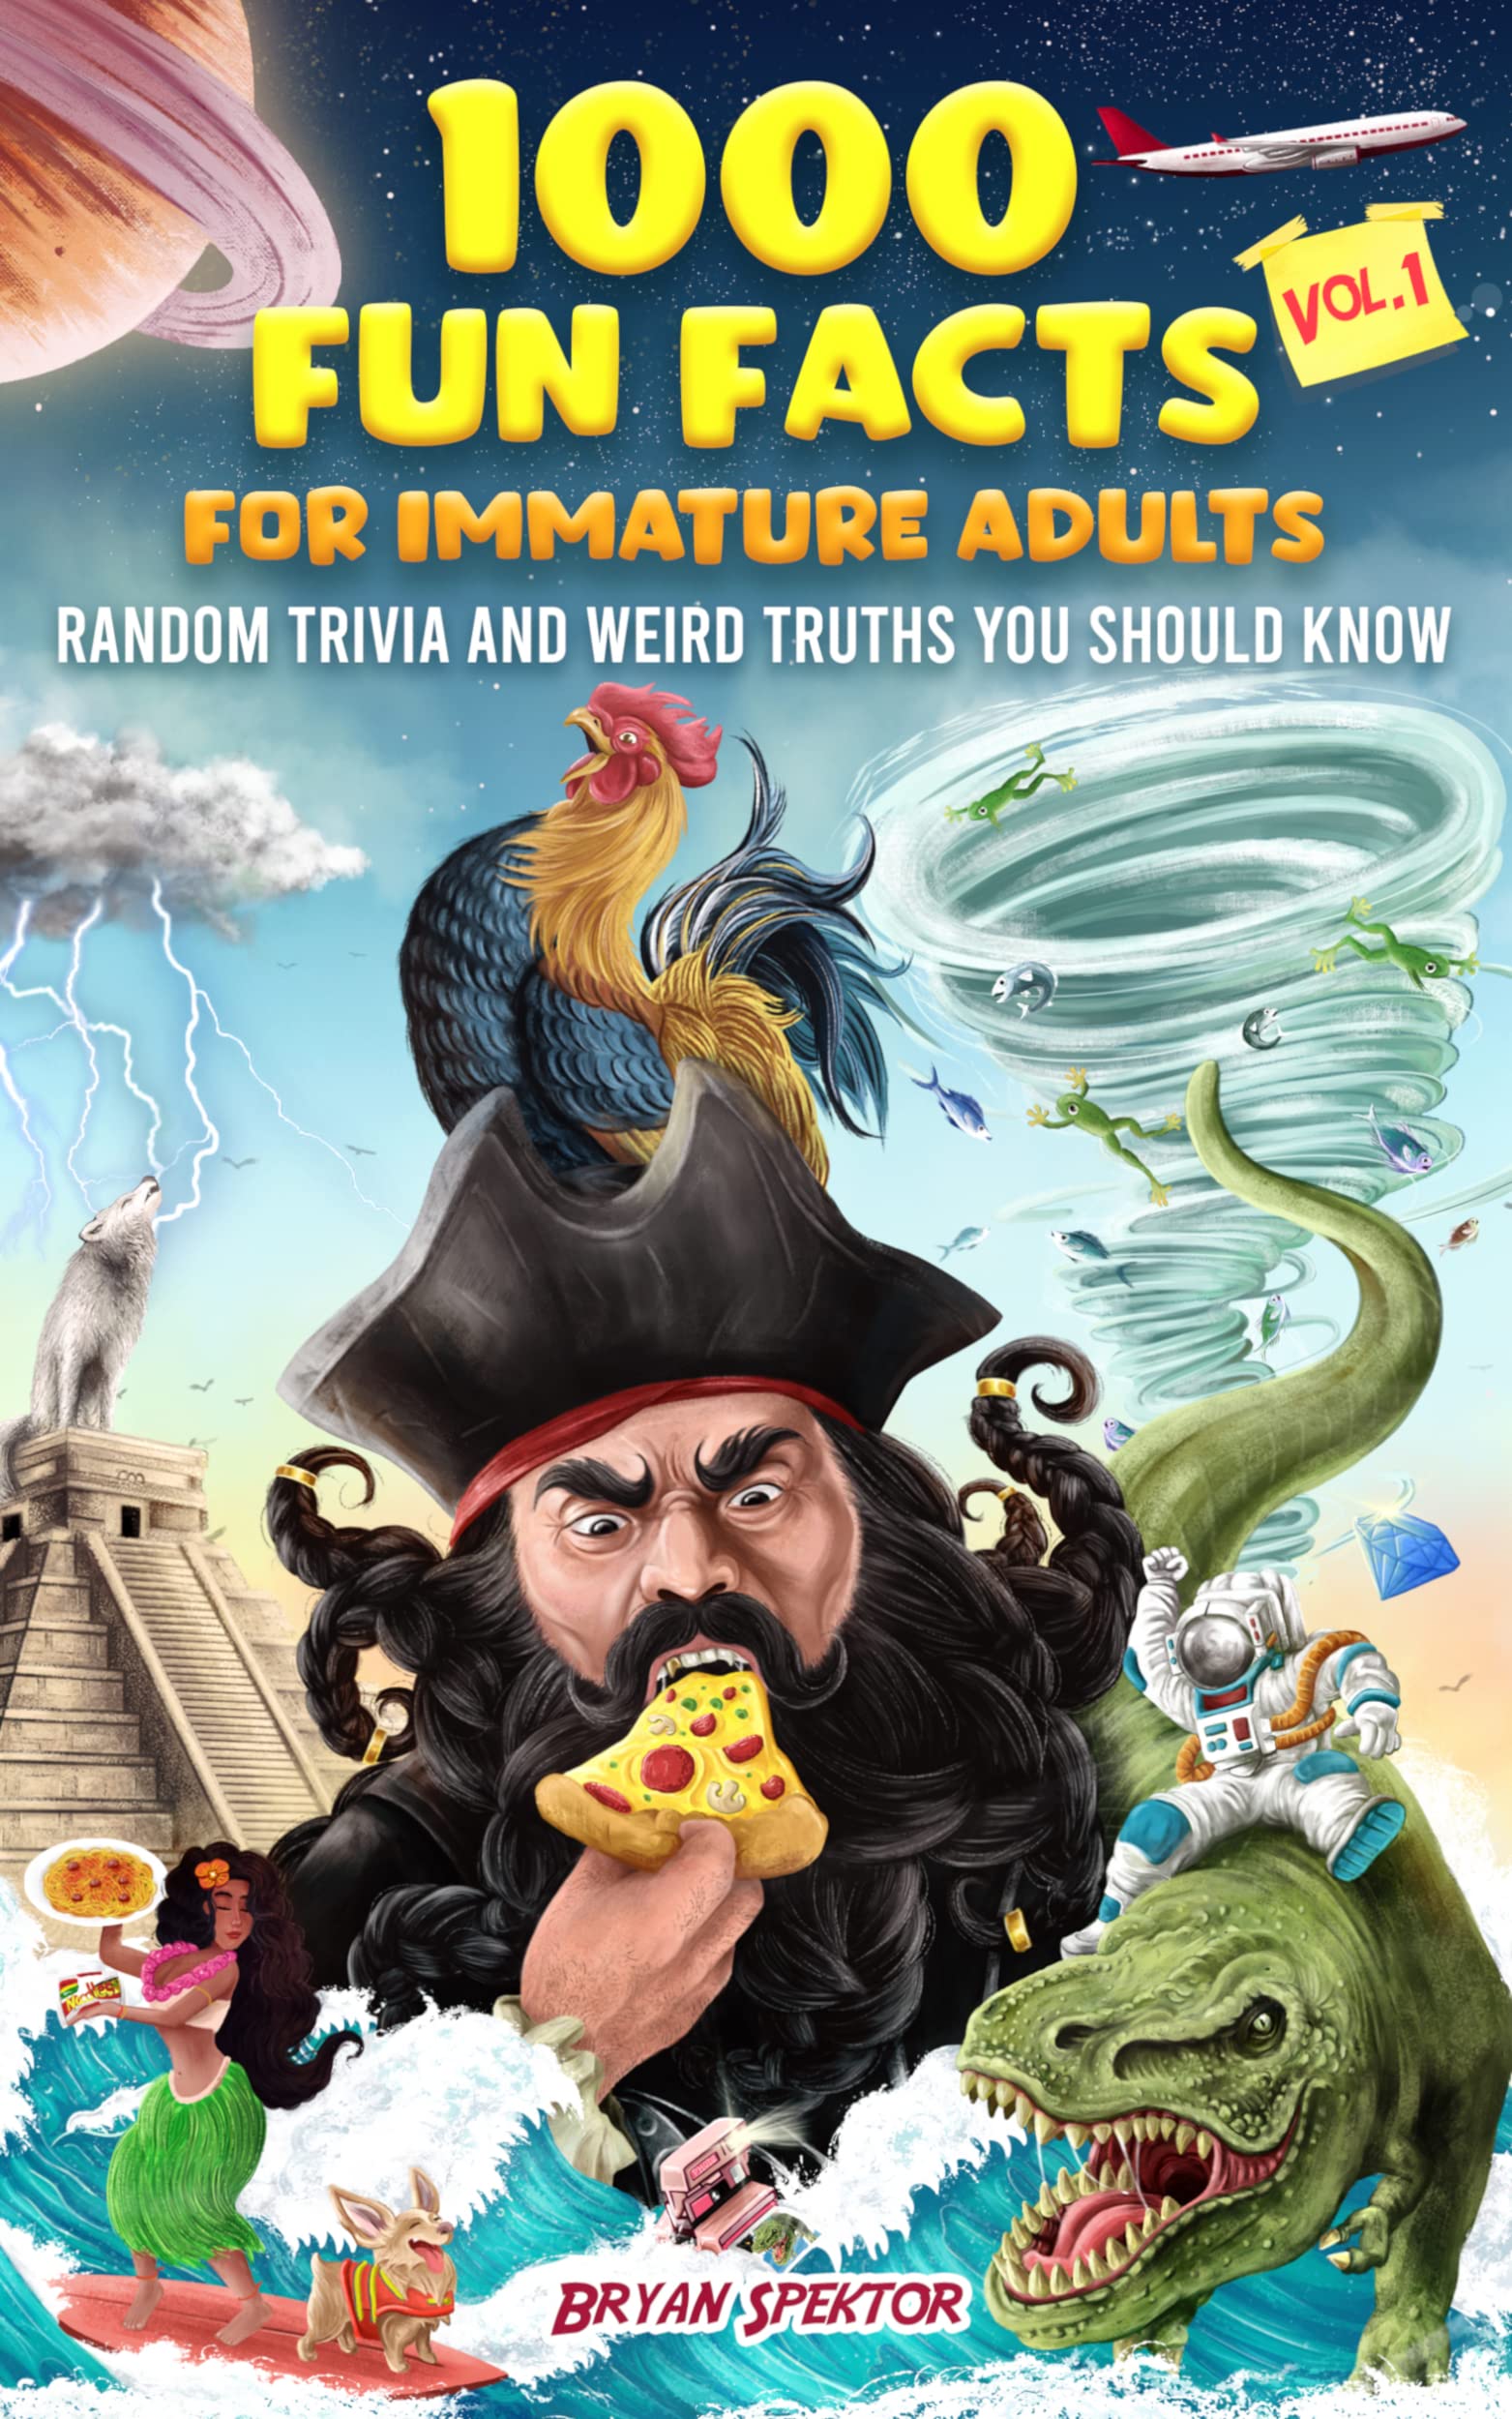 1000 Fun Facts For Immature Adults by Bryan Spektor